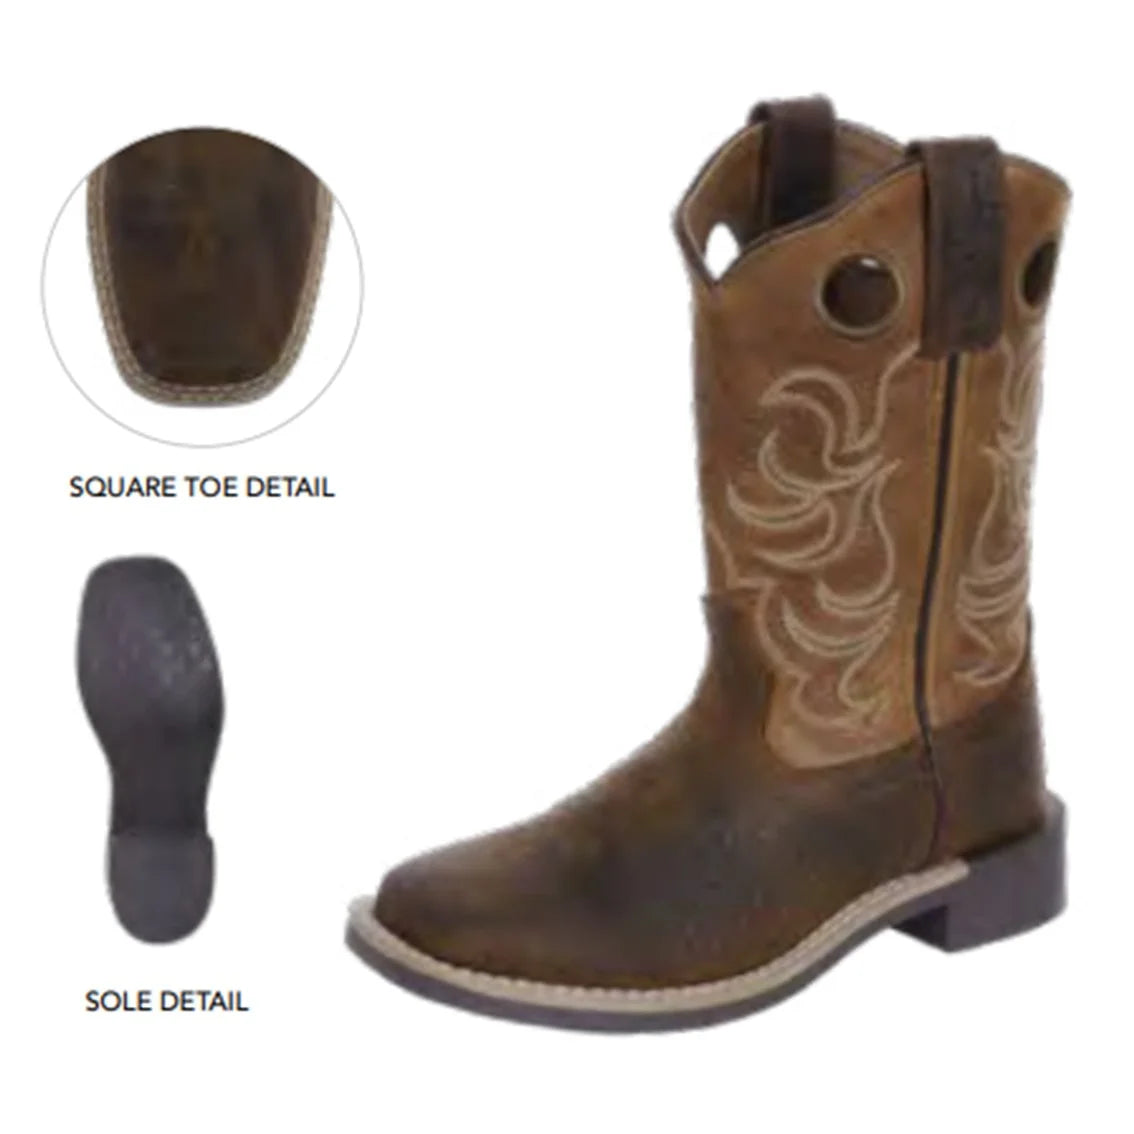 Pure Western Childrens Lincoln Boot